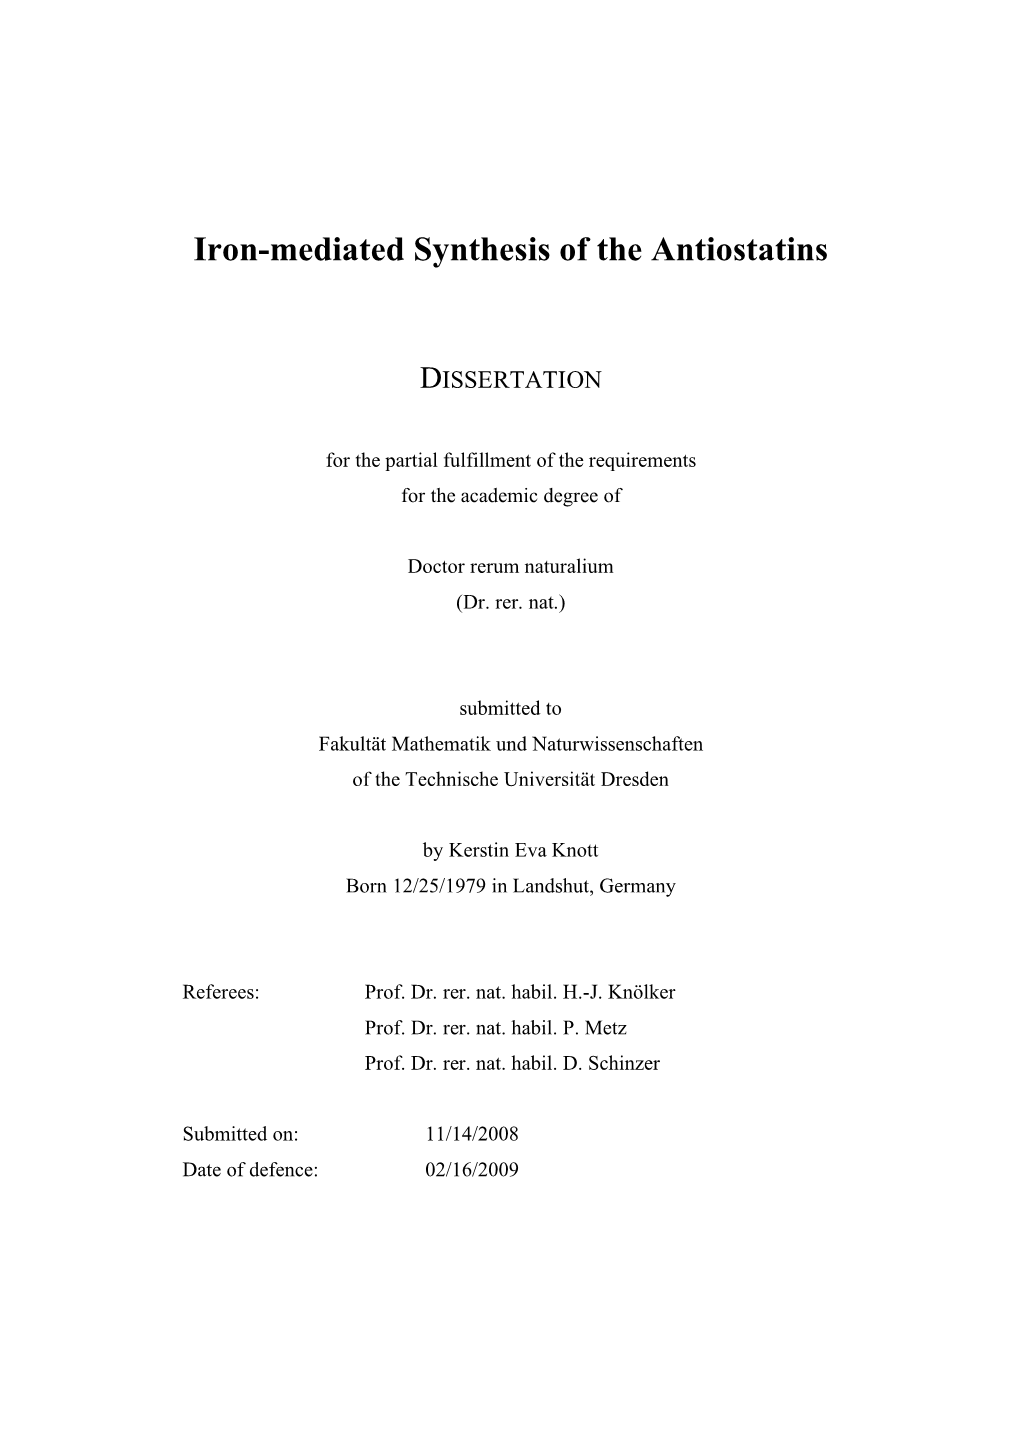 Iron-Mediated Synthesis of the Antiostatins